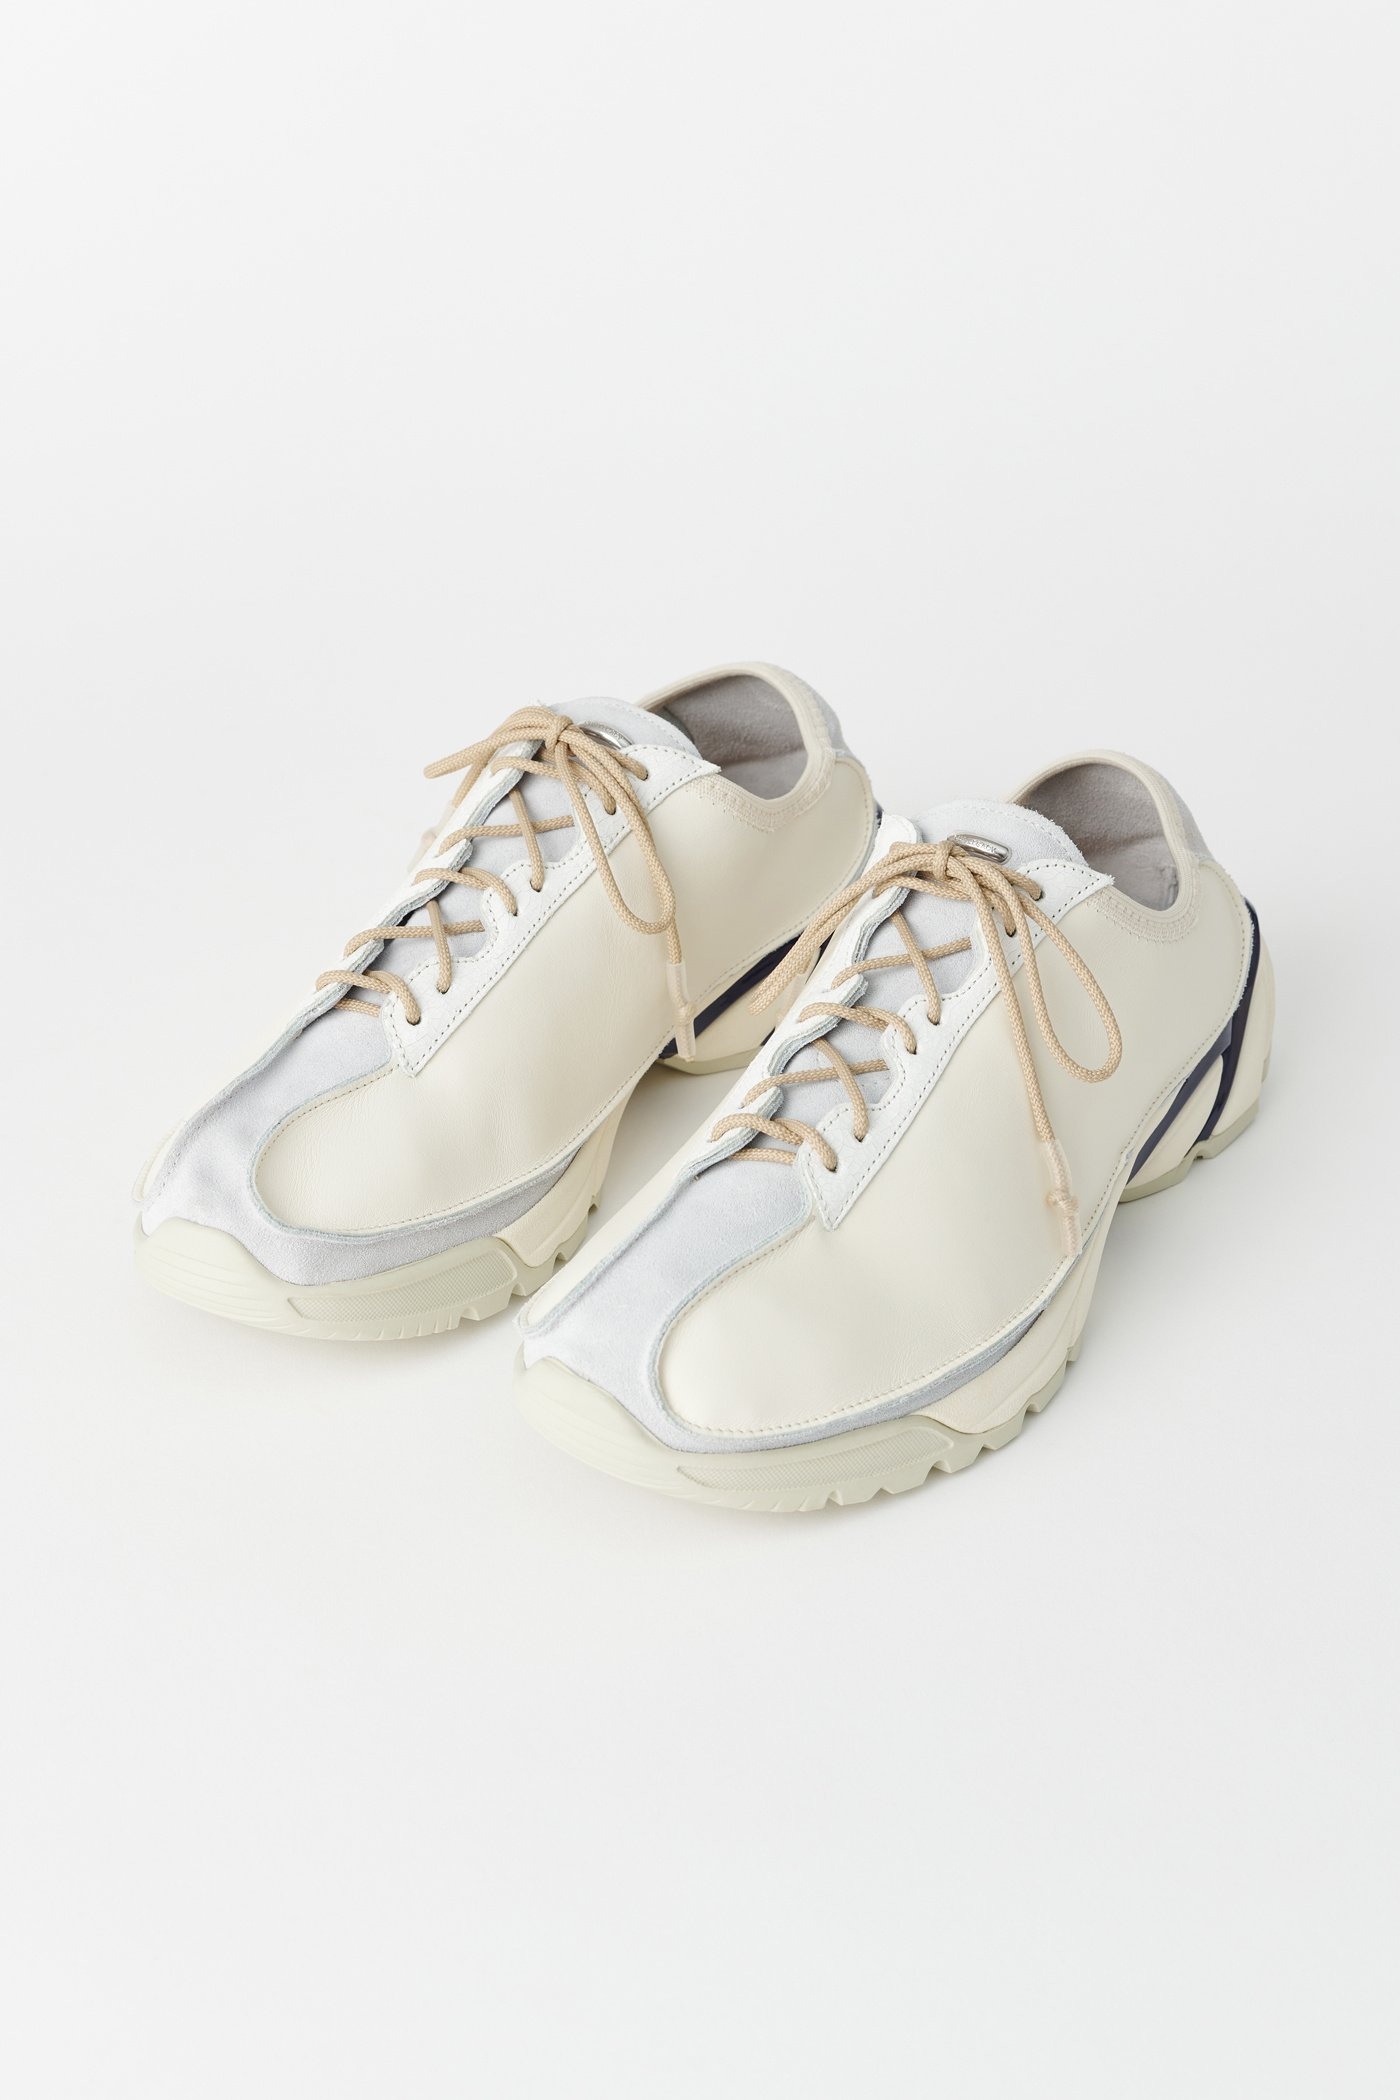 Klove shoe Off White Leather - 7